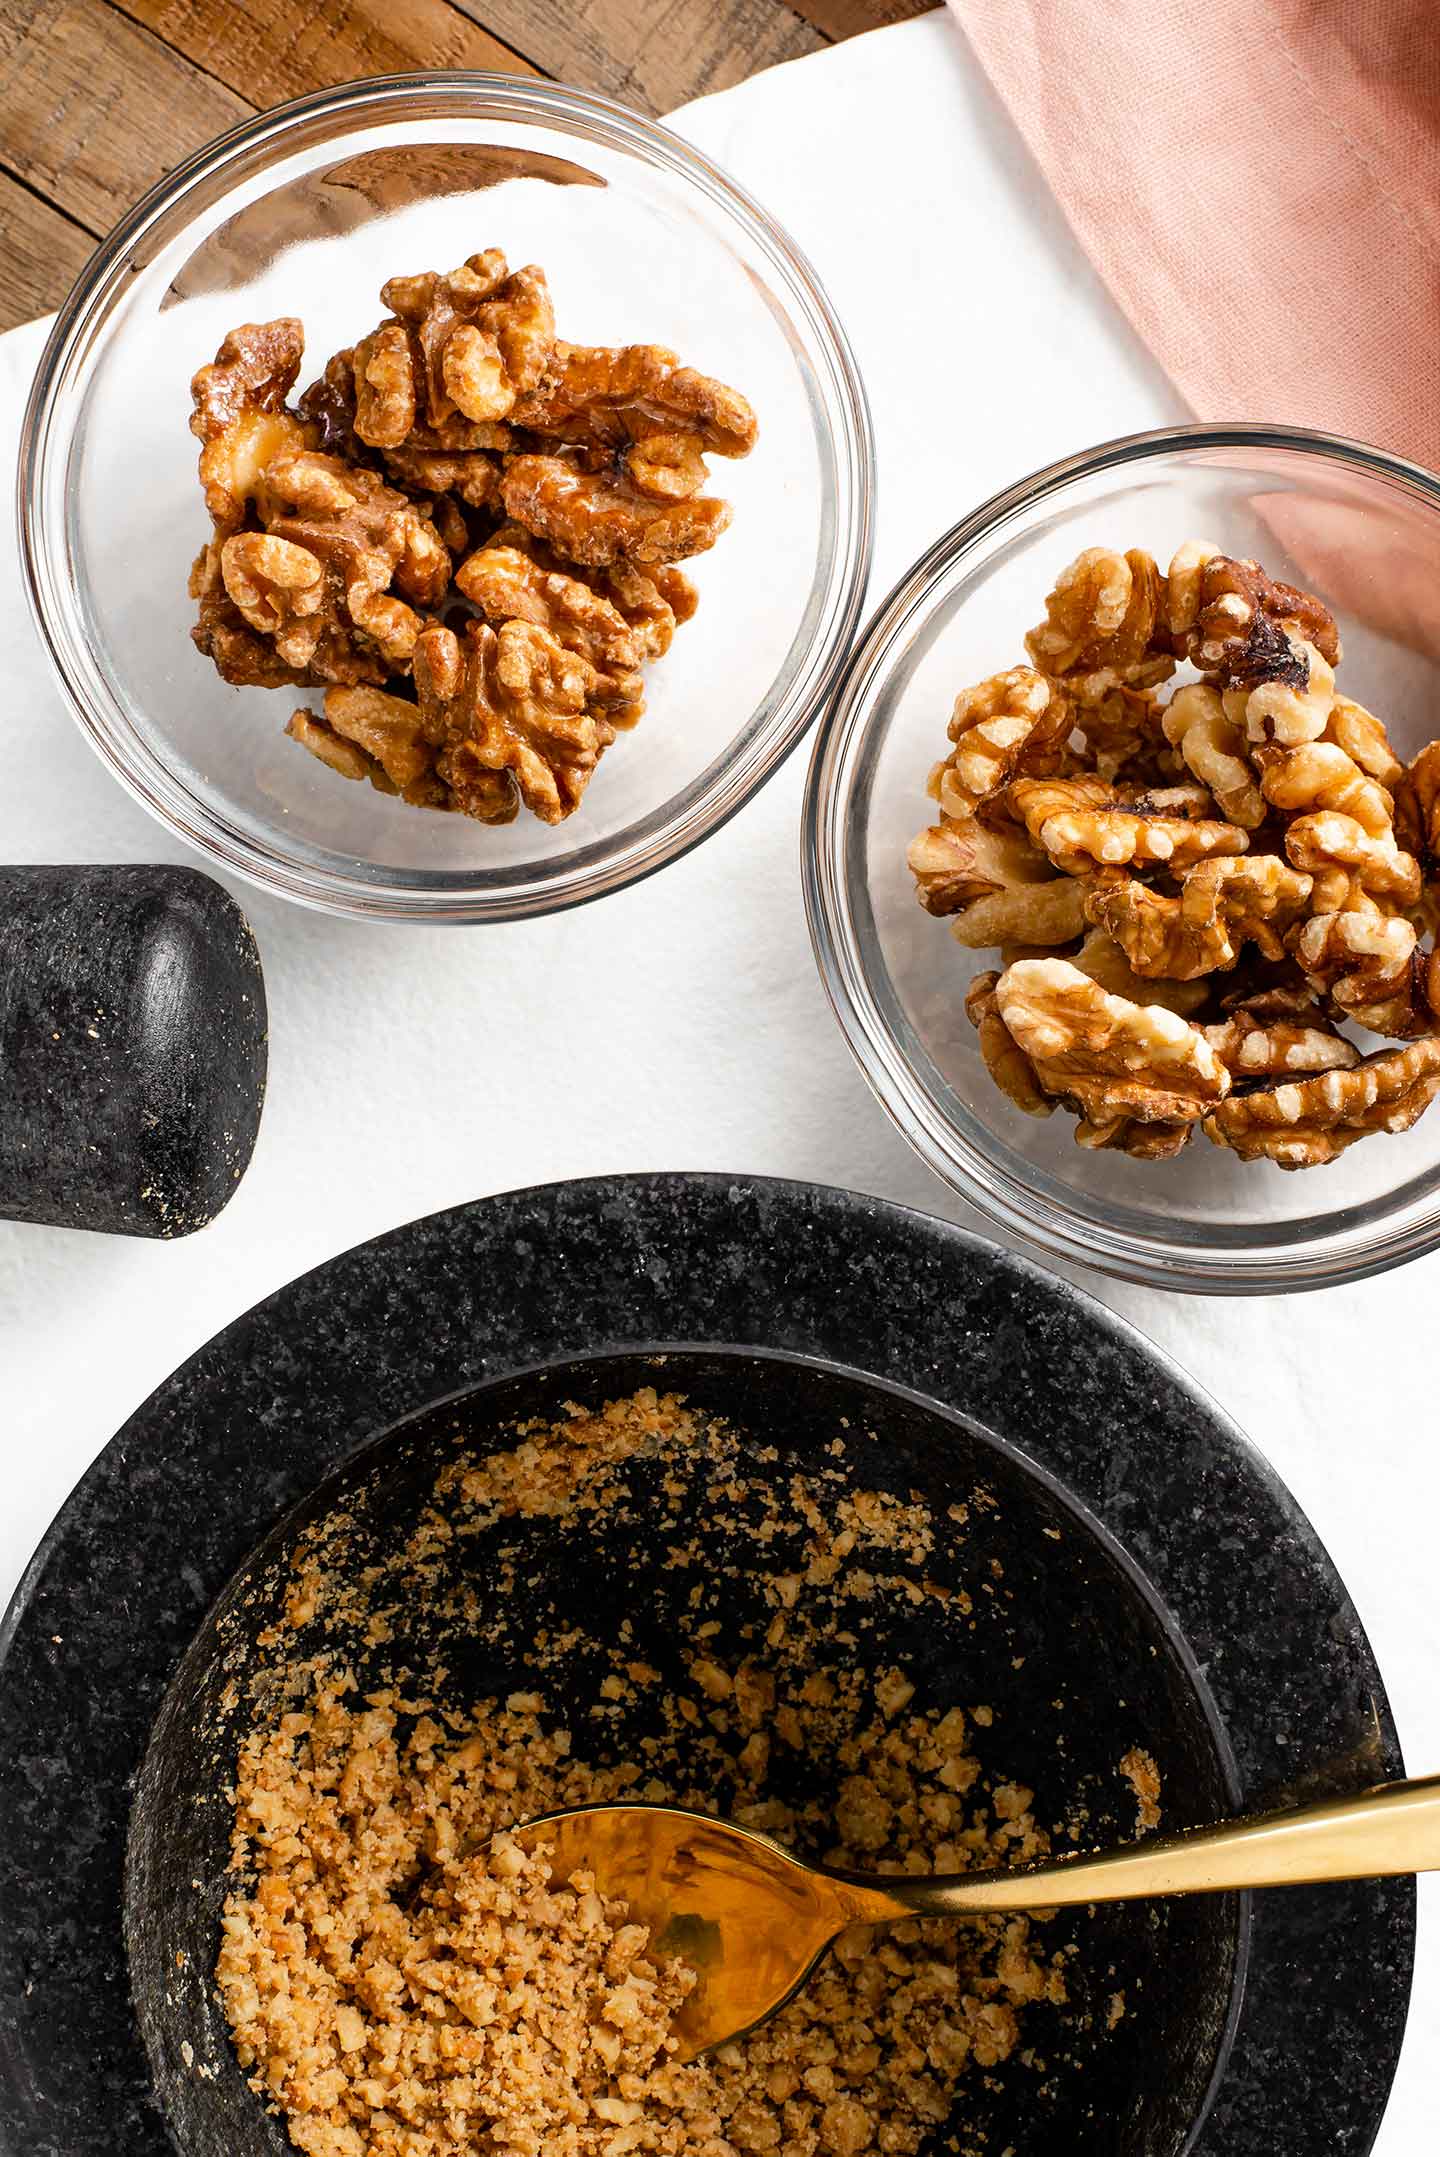 Top down view of crushed candied walnuts in a mortar and pestle. Raw walnuts and whole candied walnuts fill small dishes next to the mortar and pestle.